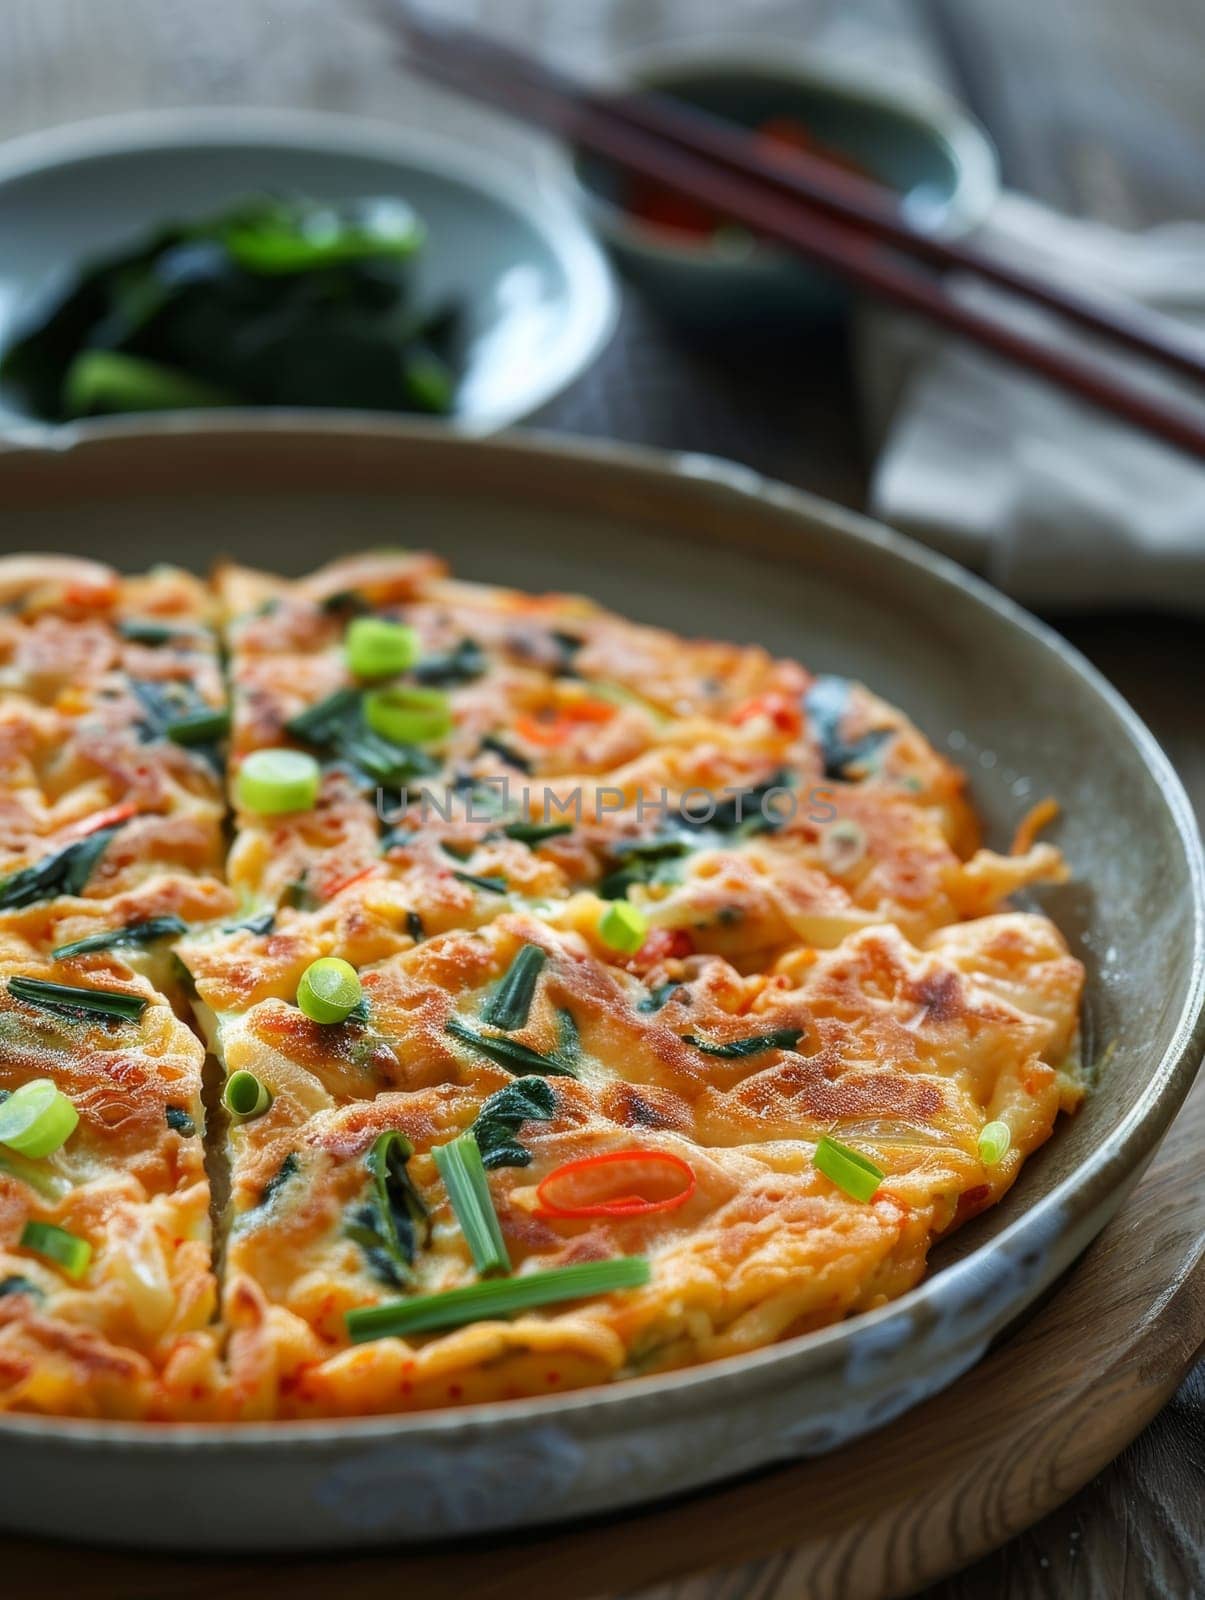 Delectable South Korean haemul pajeon, a savory seafood pancake with fresh scallions, served on a ceramic dish. This traditional Asian cuisine item makes a mouthwatering appetizer or snack. by sfinks